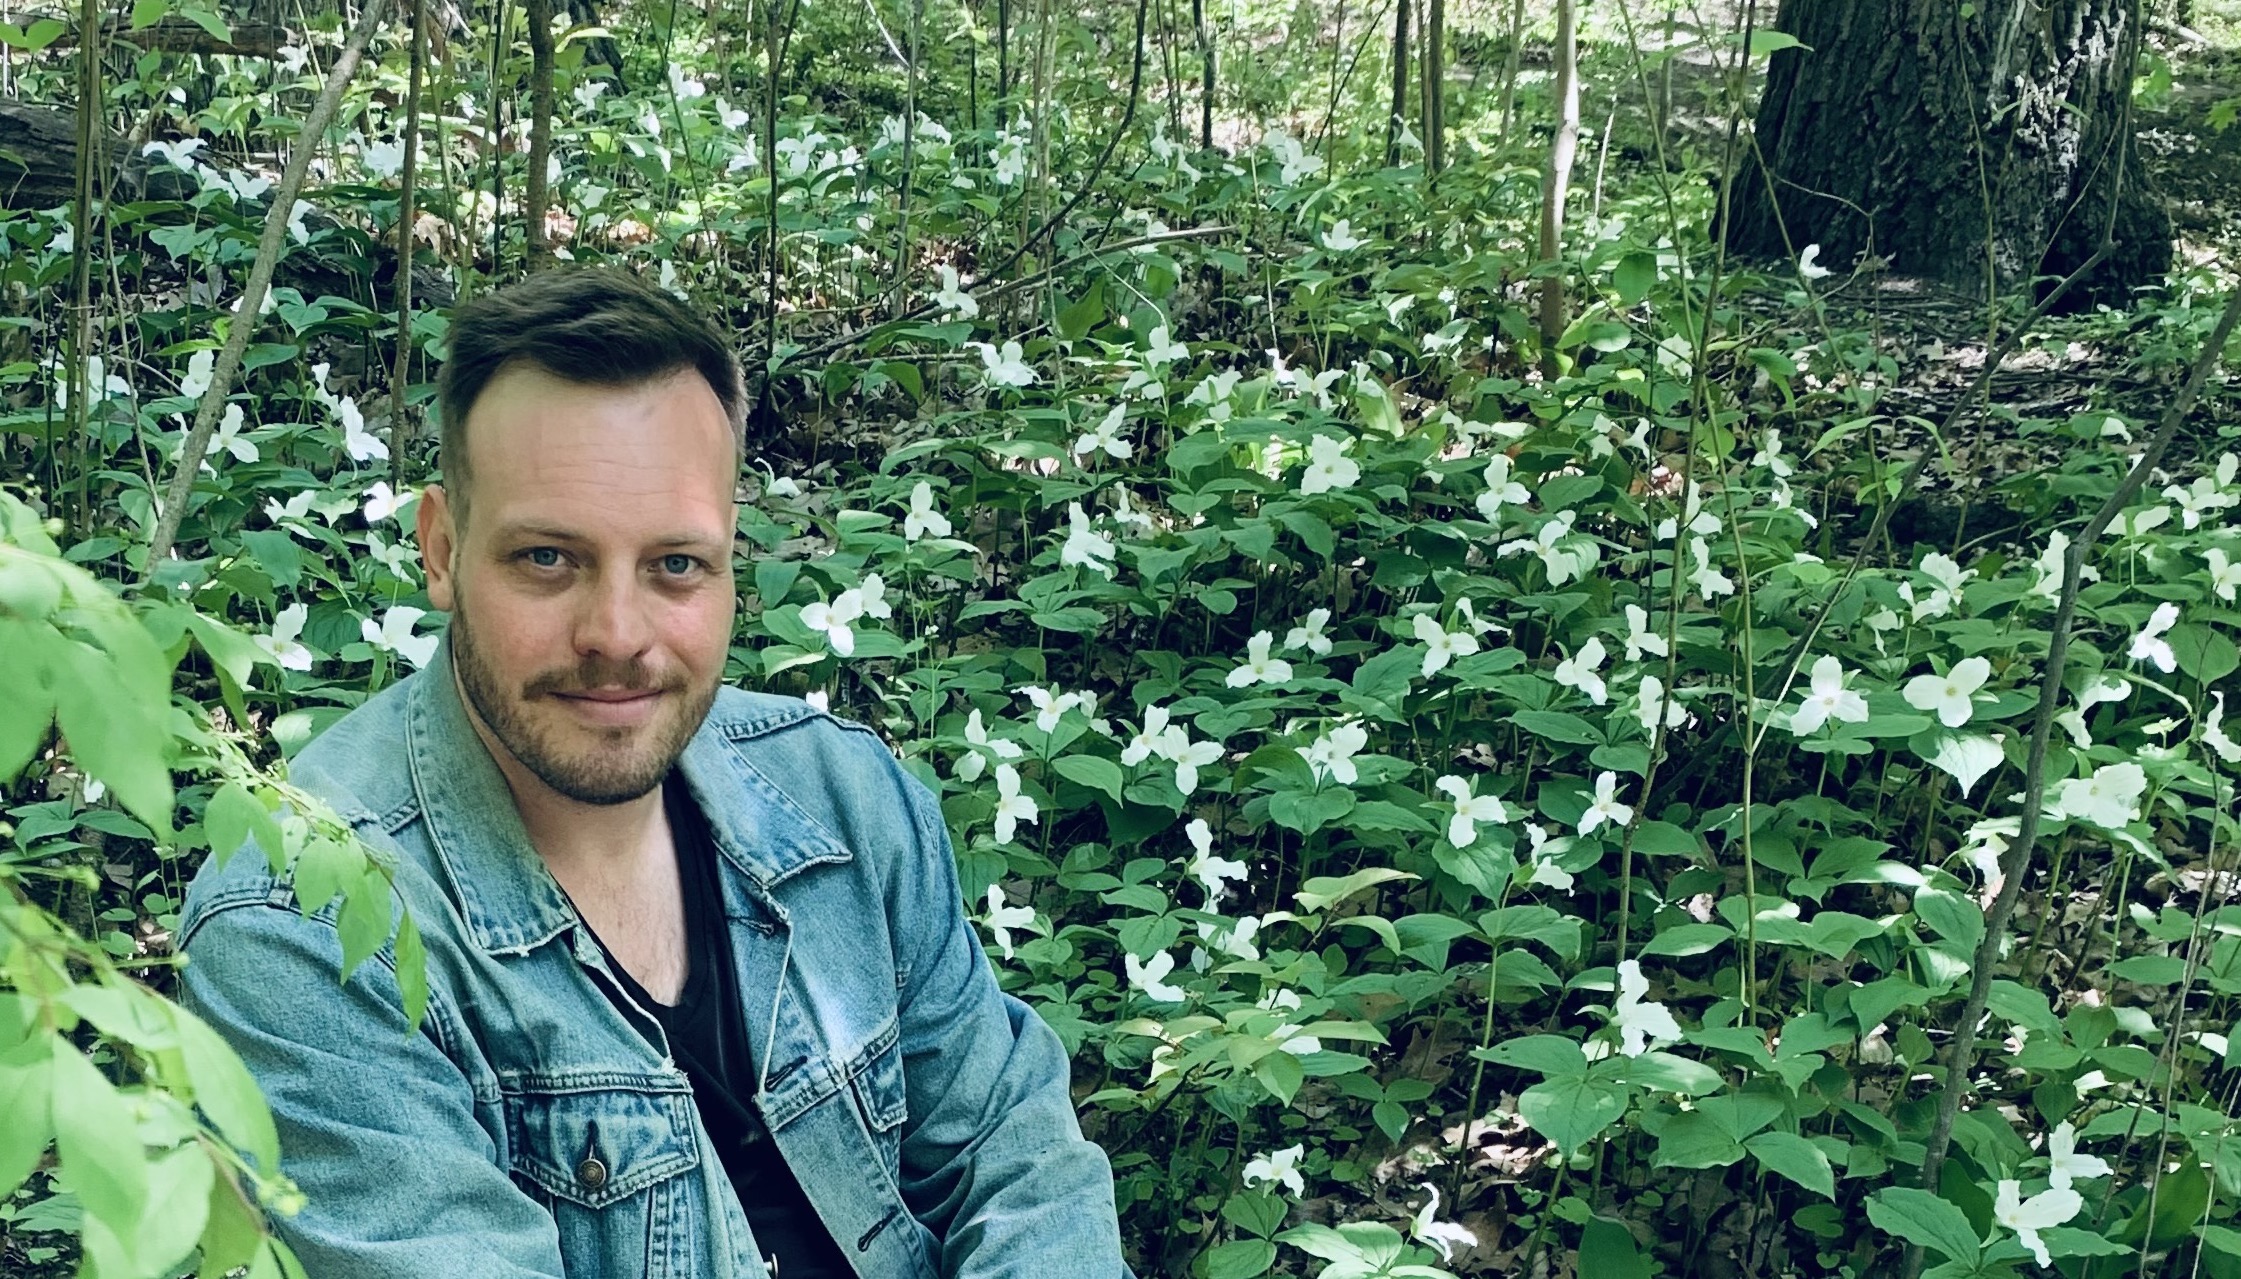 Portrait of Stefan Herda sitting in a forest clearing surrounded by white trillium plants.